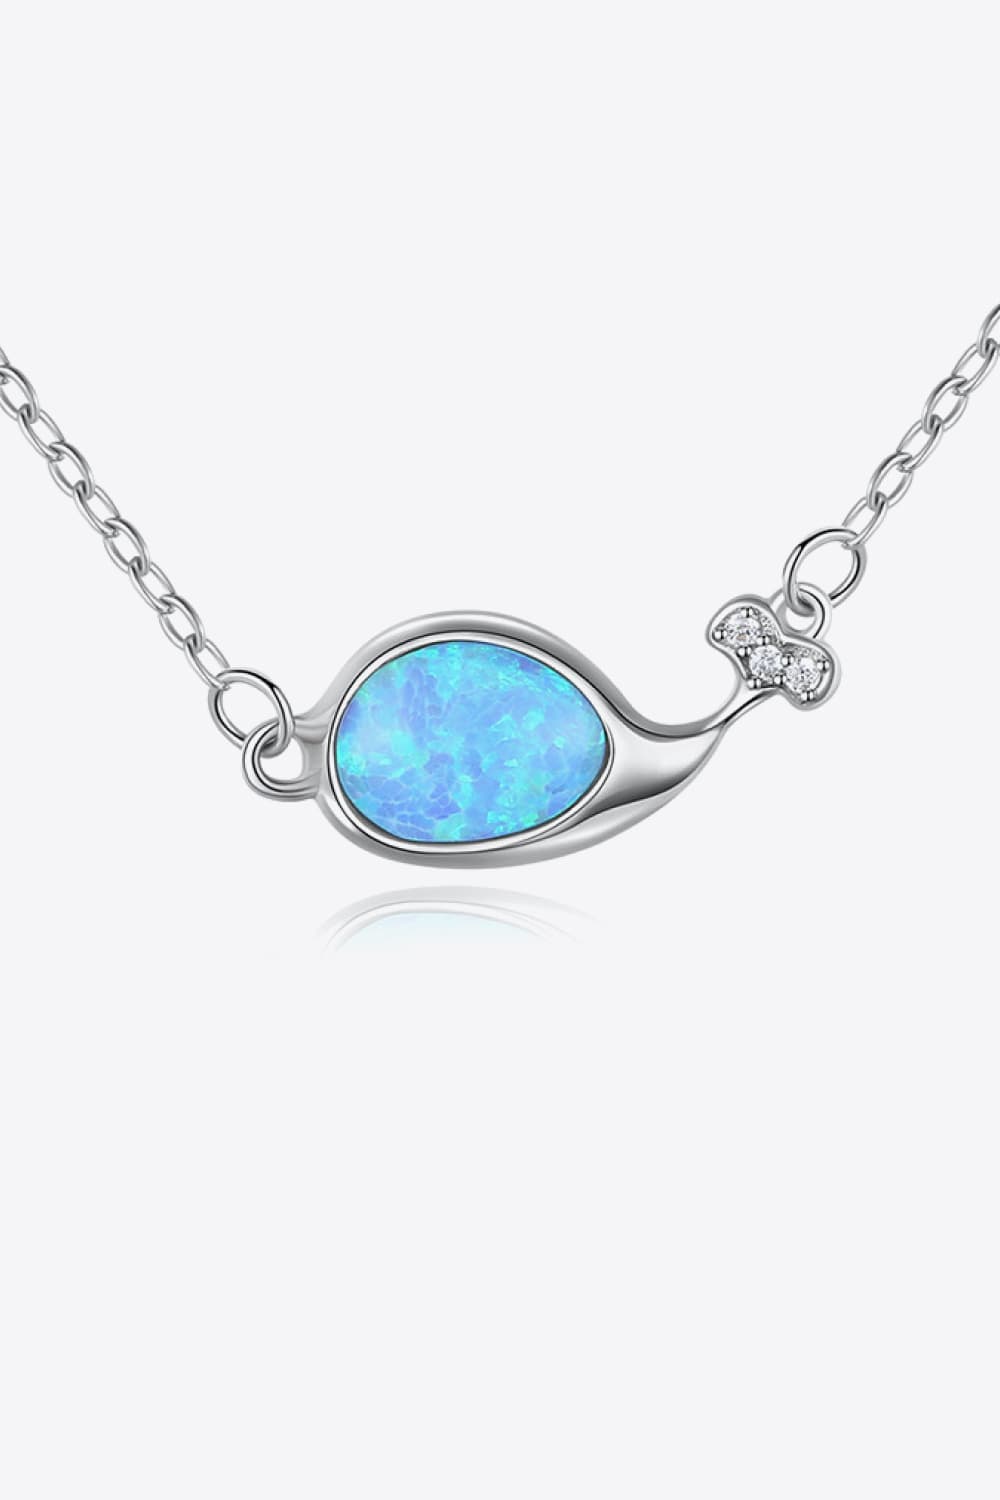 Opal Dolphin 925 Sterling Silver Necklace - Tropical Seas Clothing 